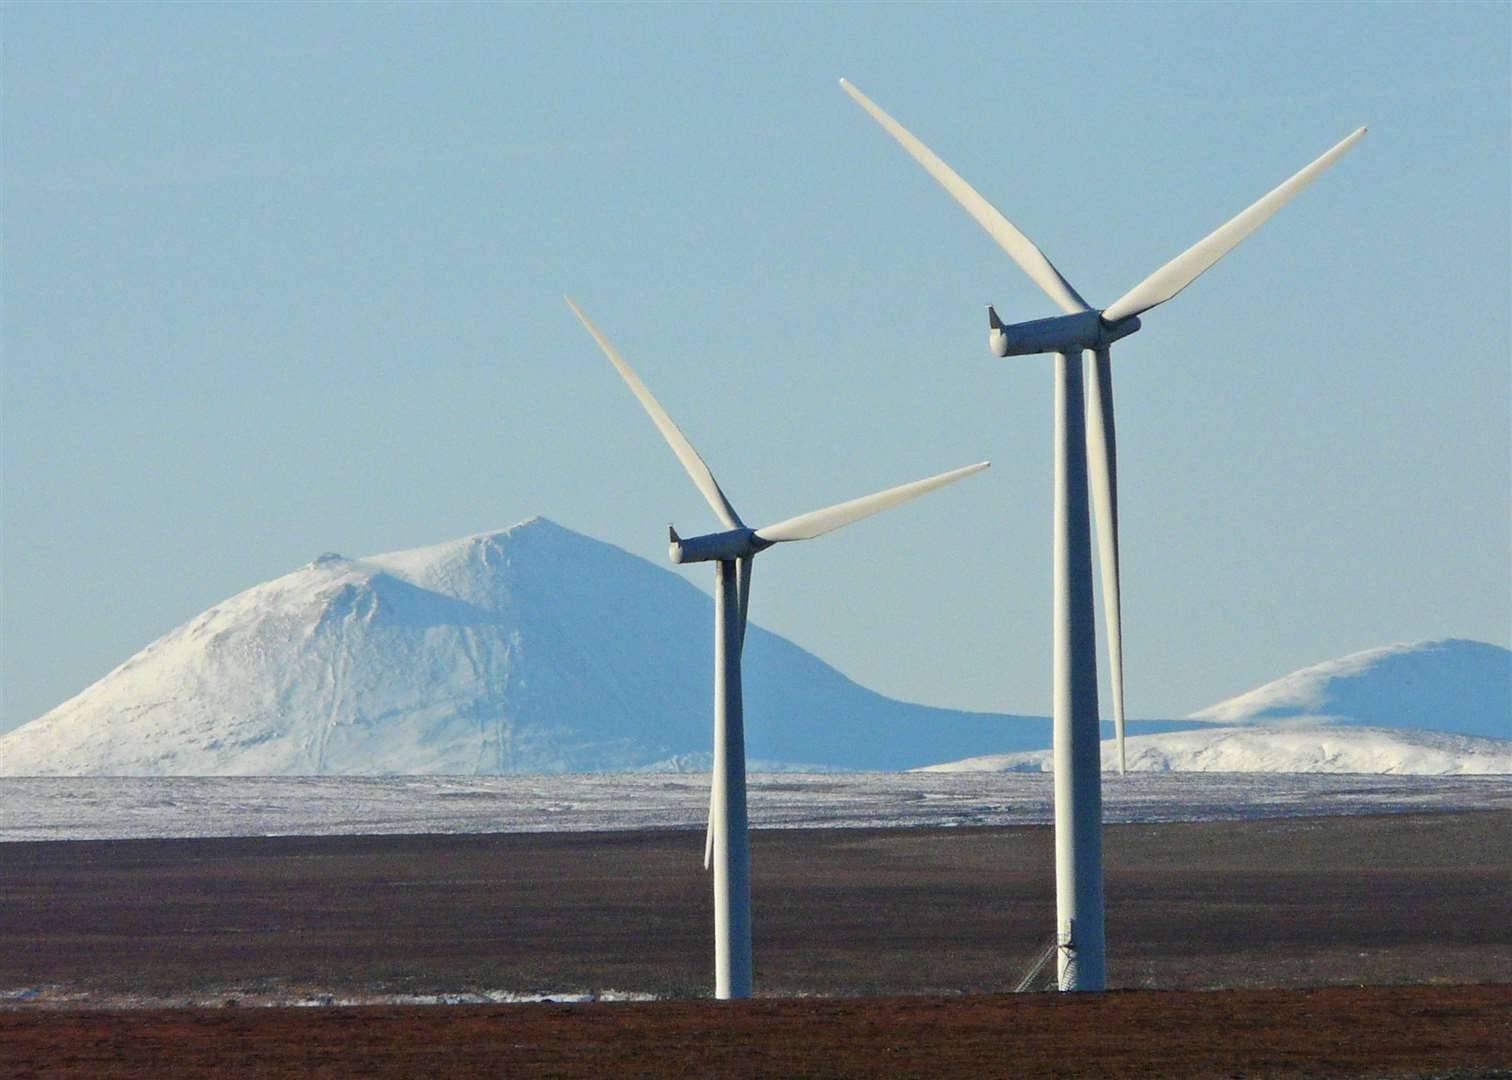 Wind farm operators receive a guaranteed payment if they are asked to switch off turbines.